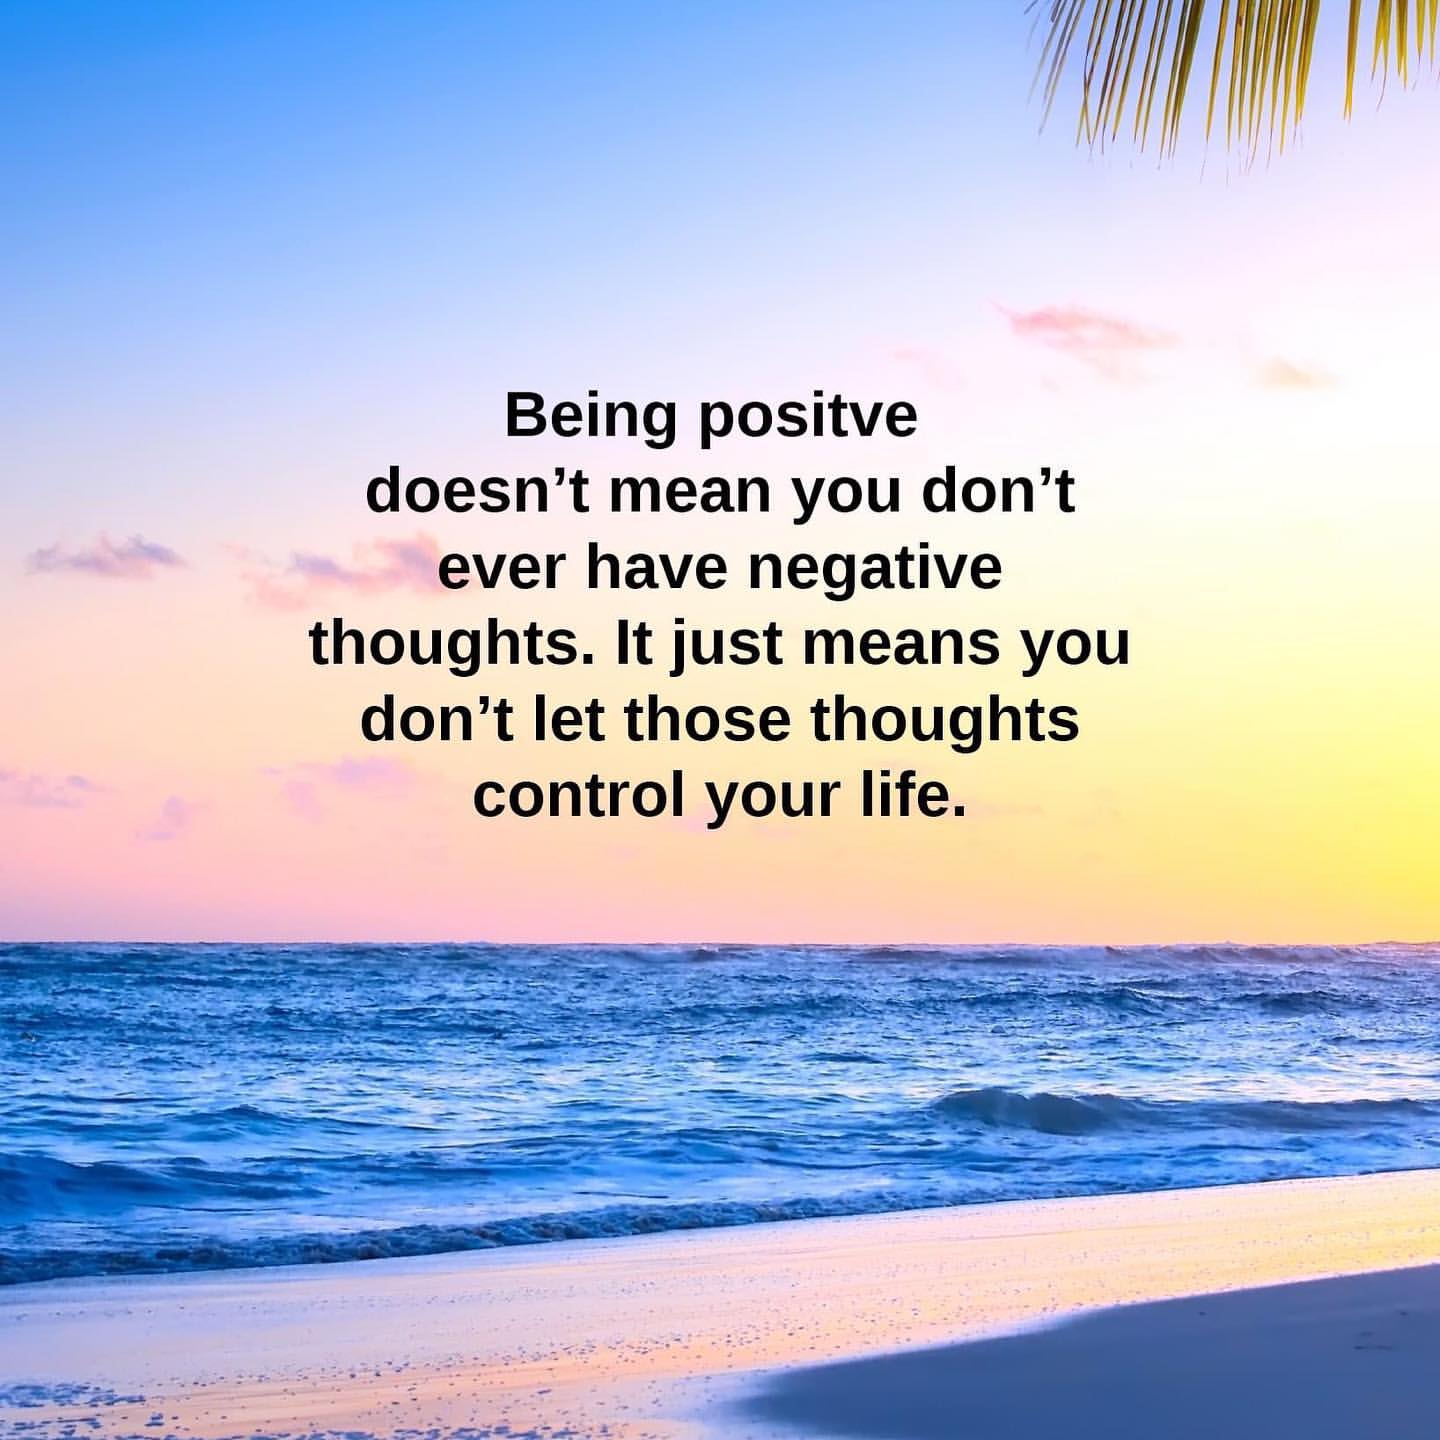 Being positive doesn't mean you don't ever have negative thoughts. It just means you don't let those thoughts control your life.